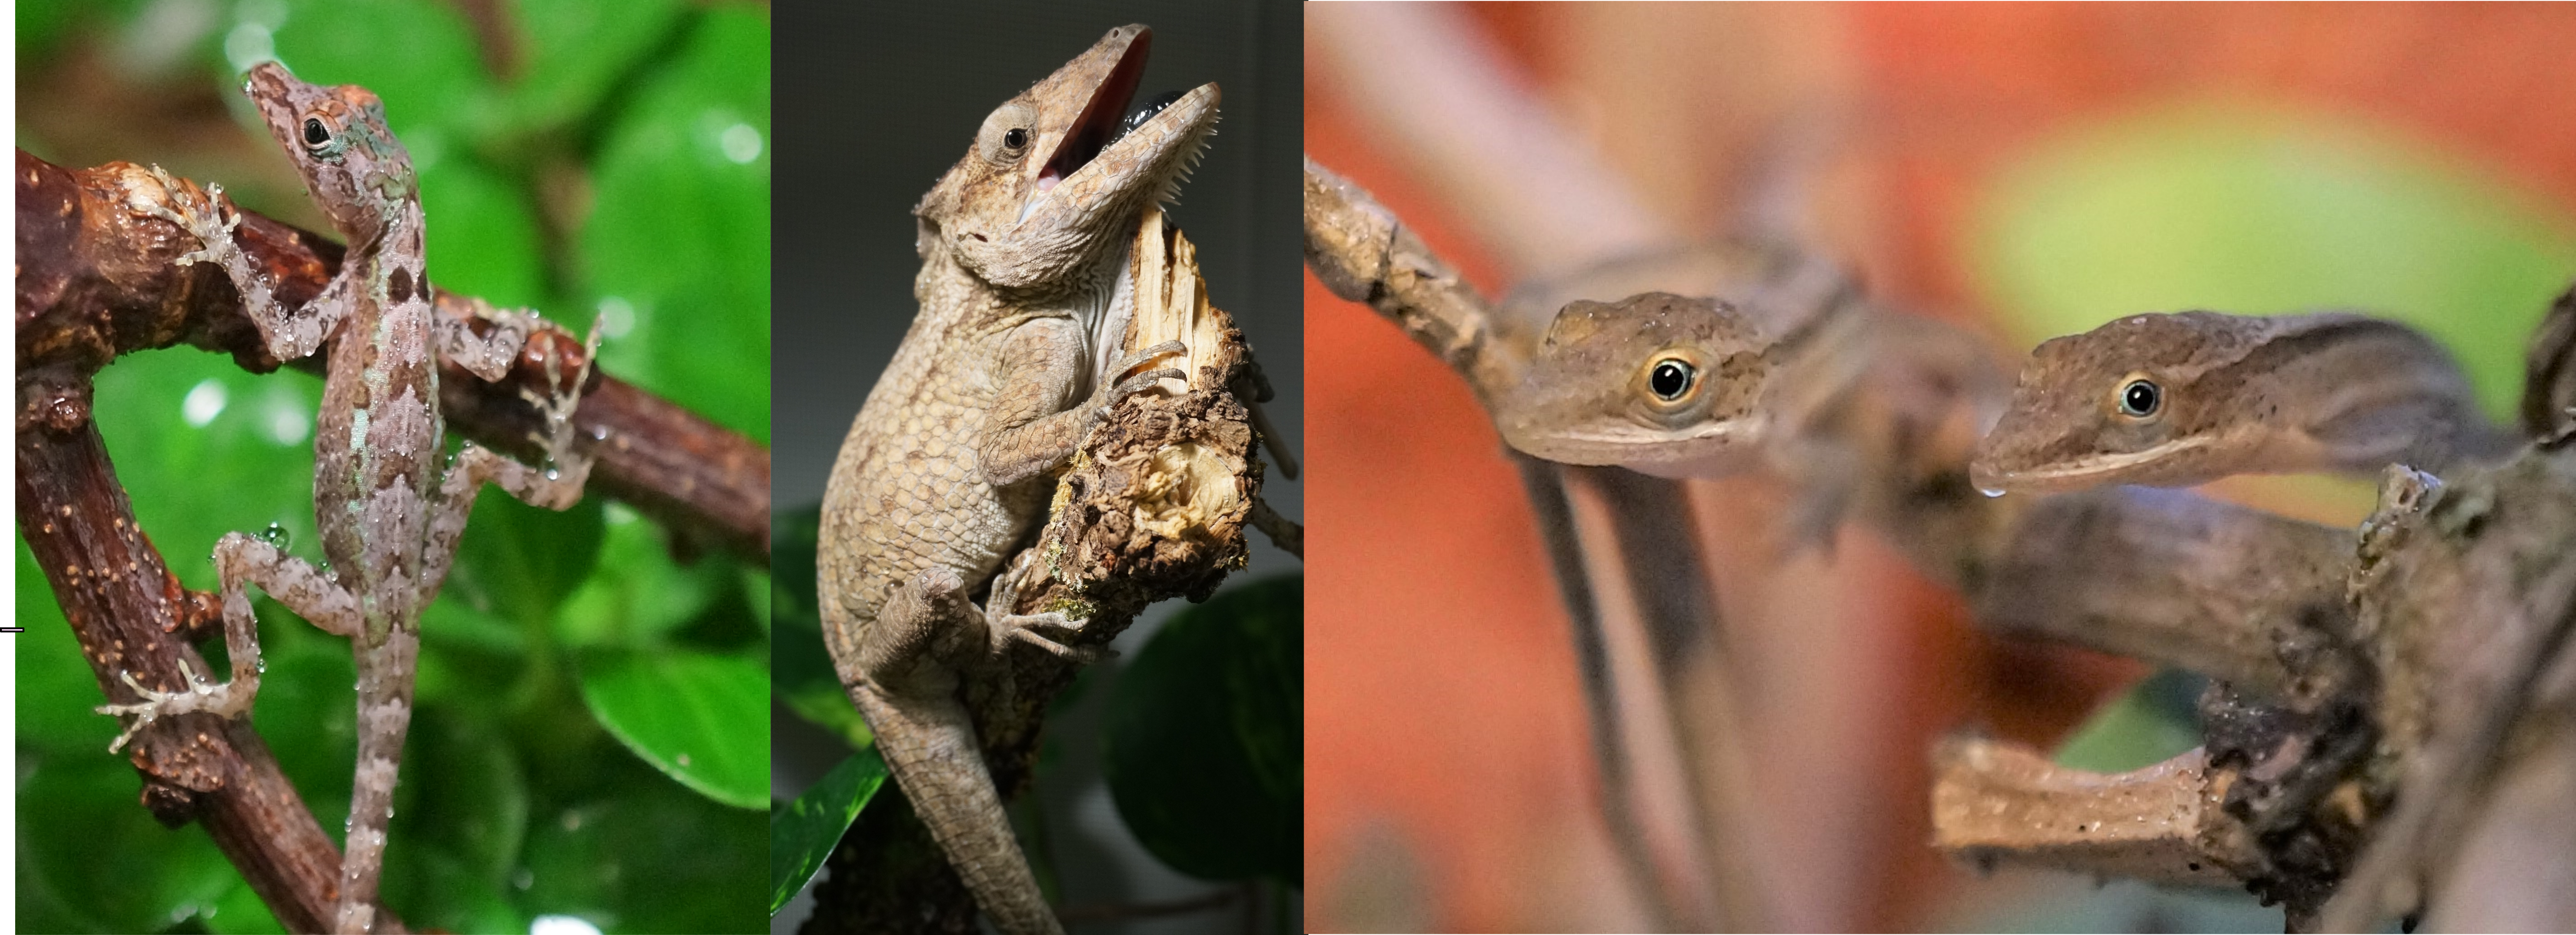 From left to right, Anolis christophei, Anolis porcus and Anolis rejectus